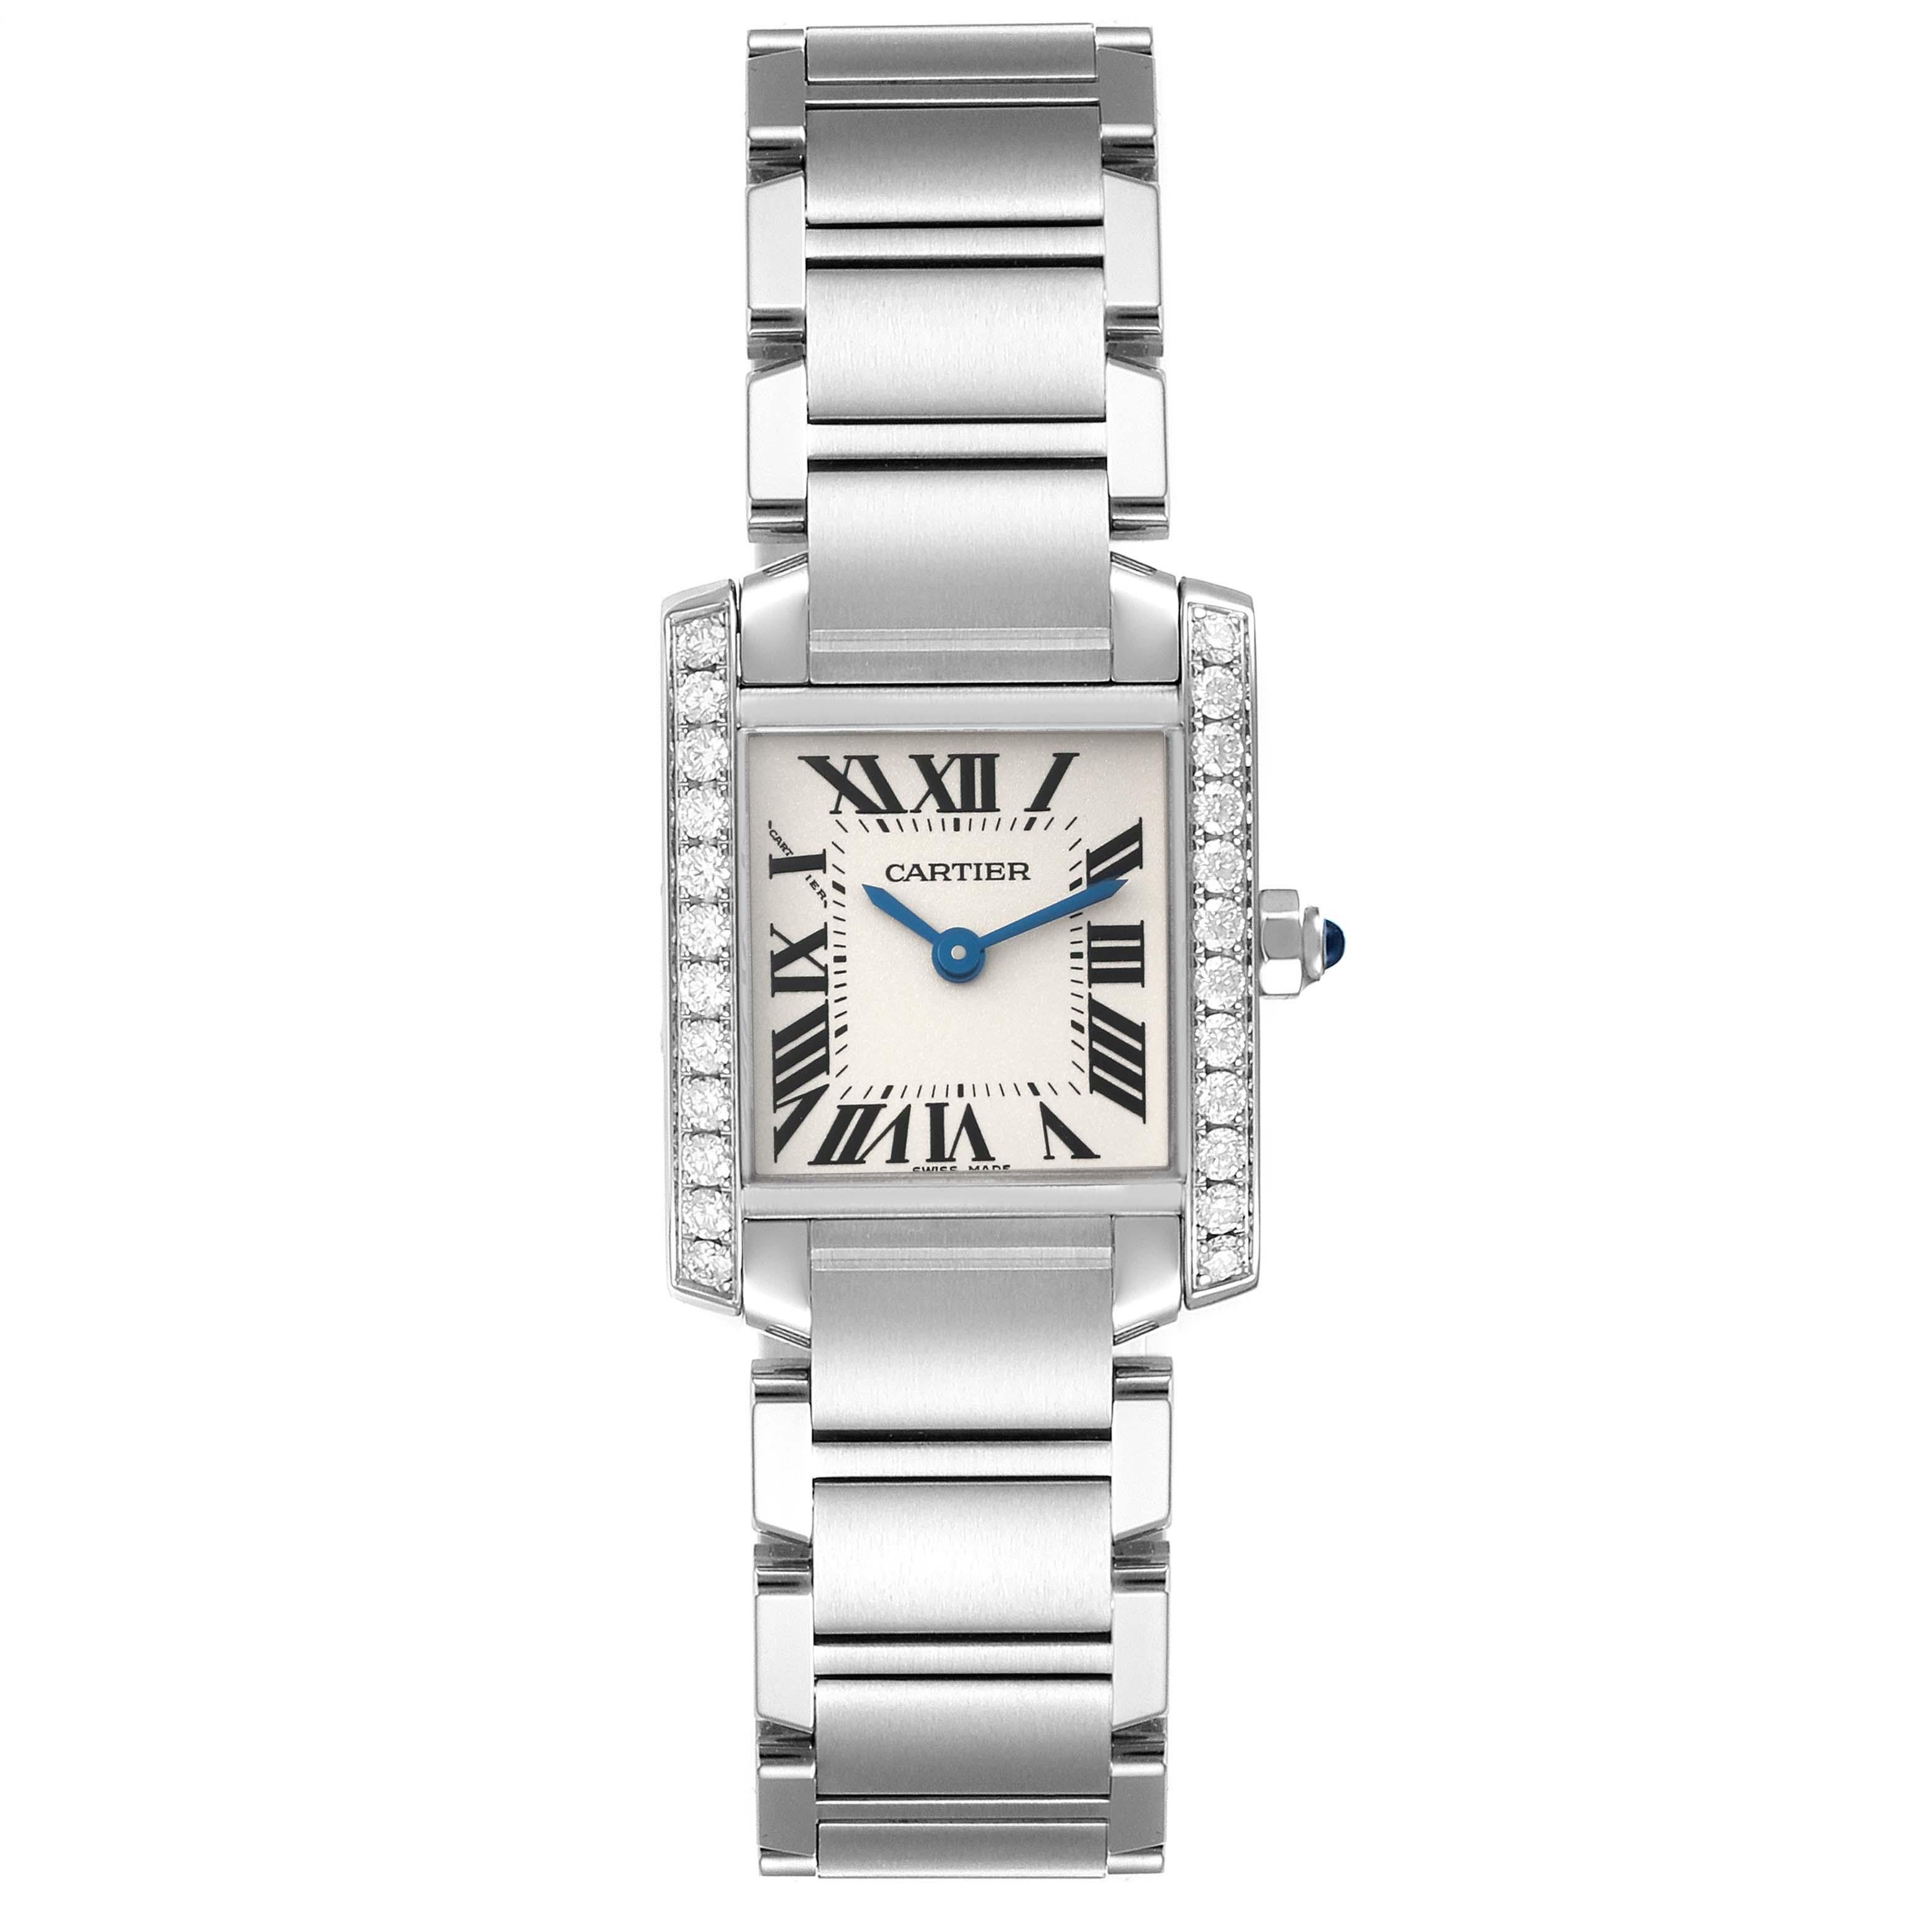 Cartier Tank Francaise Small Steel Diamond Bezel Ladies Watch W4TA0008 Box Card In Excellent Condition For Sale In Atlanta, GA